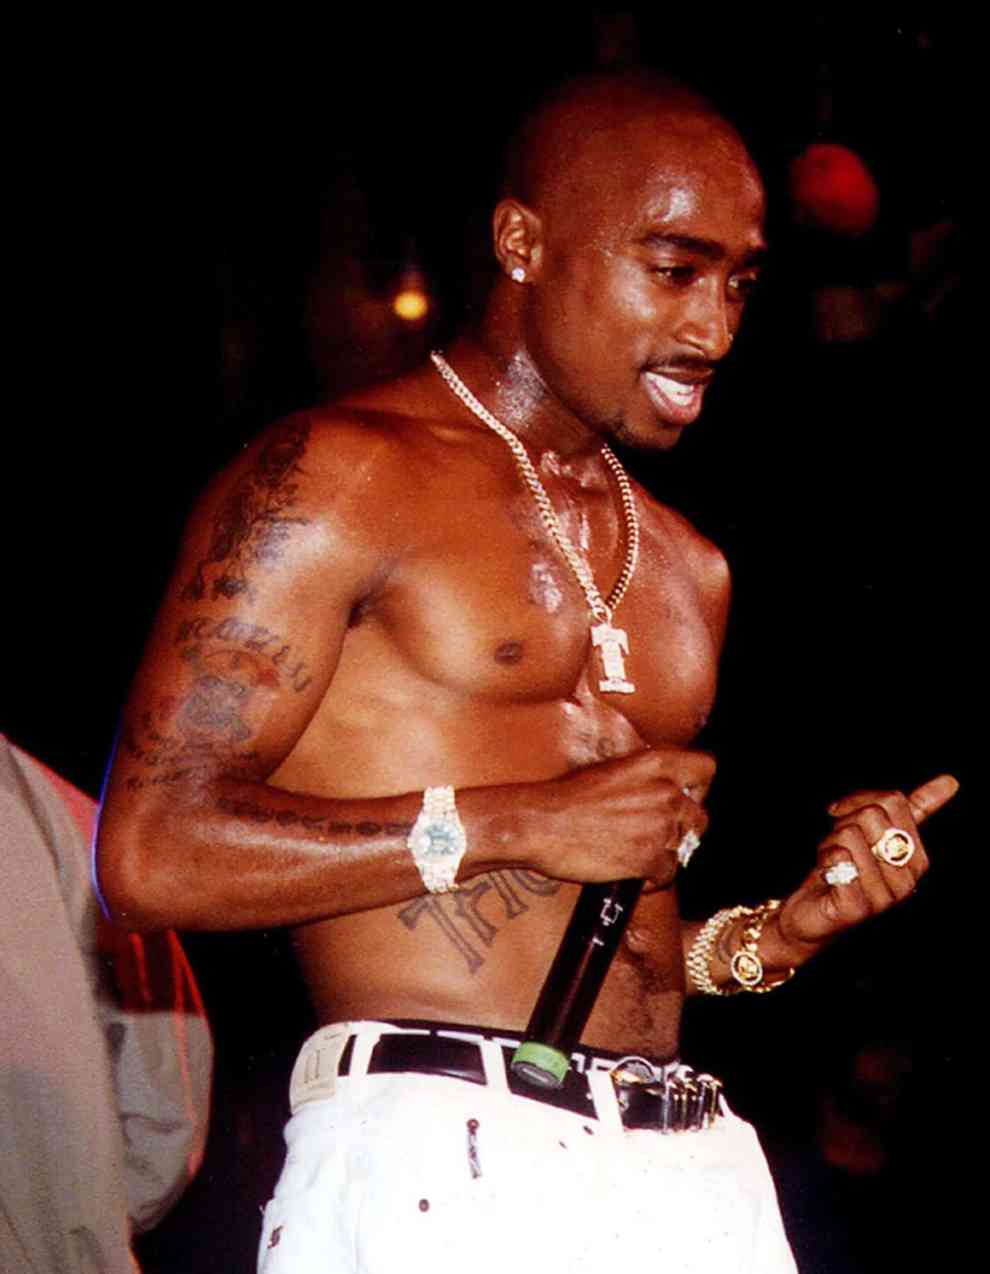 2Pac with microphone performing shirtless